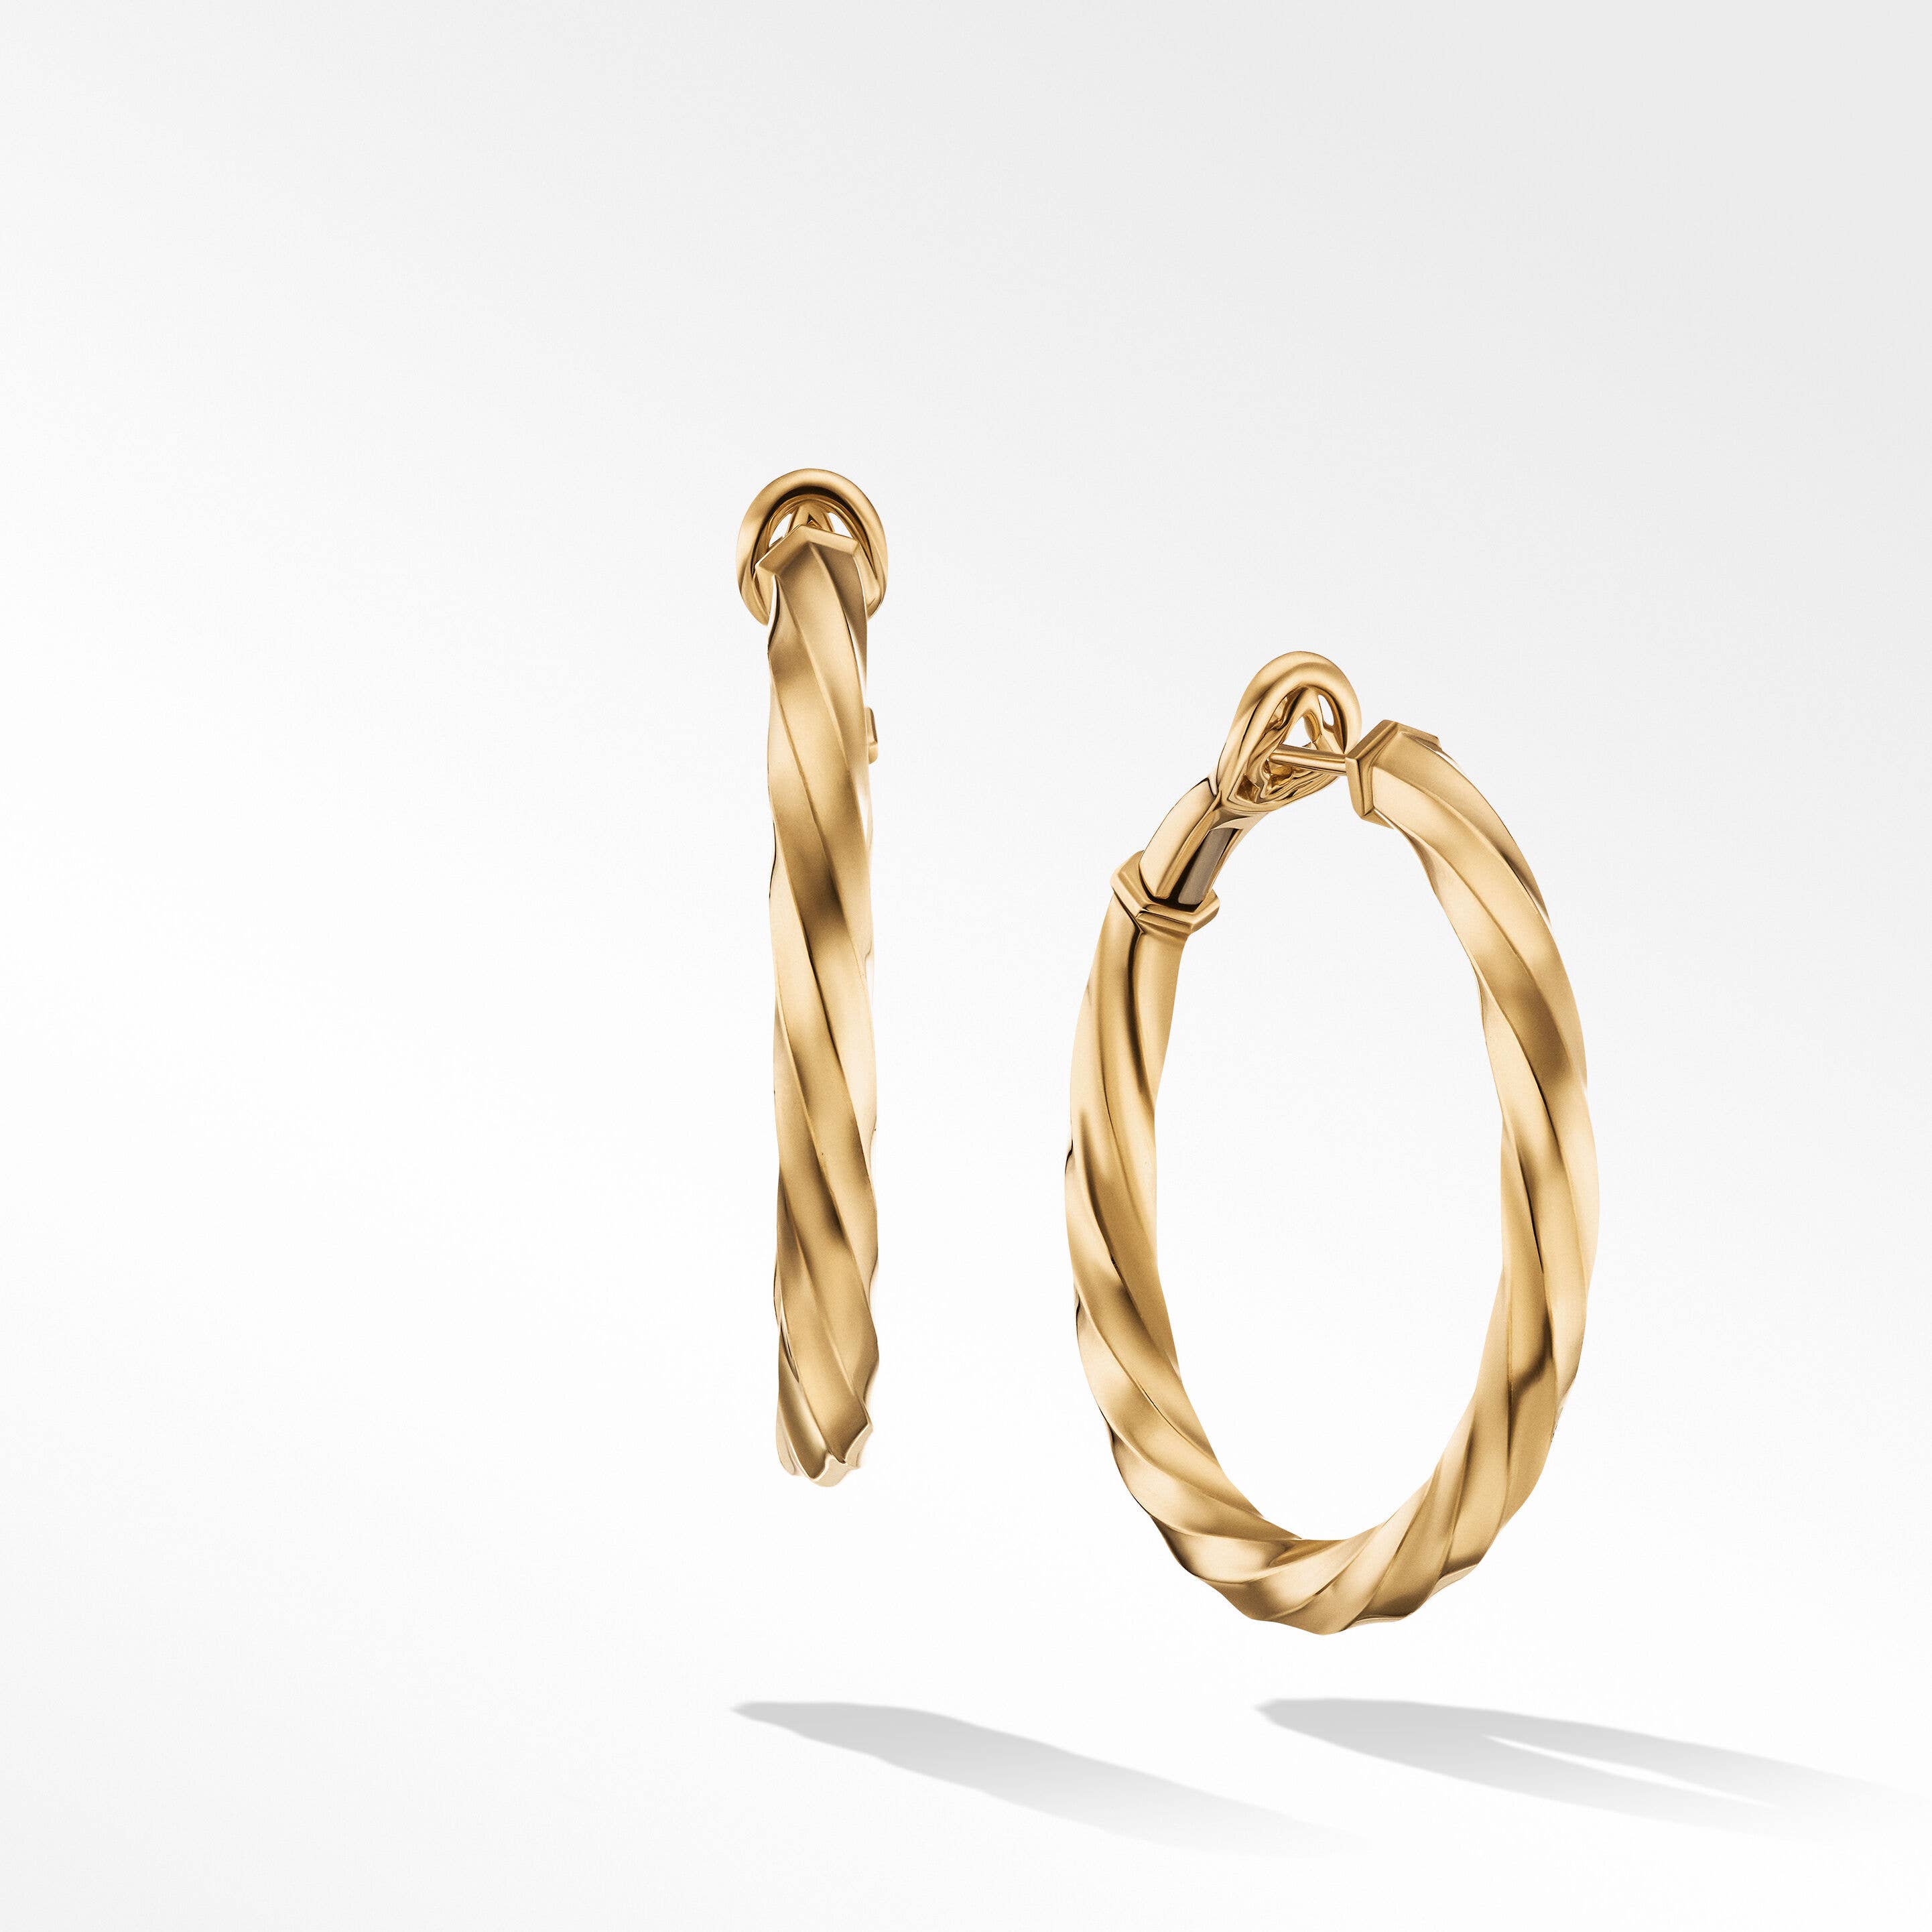 Cable Edge Hoop Earrings in Recycled 18K Yellow Gold, 1.5"